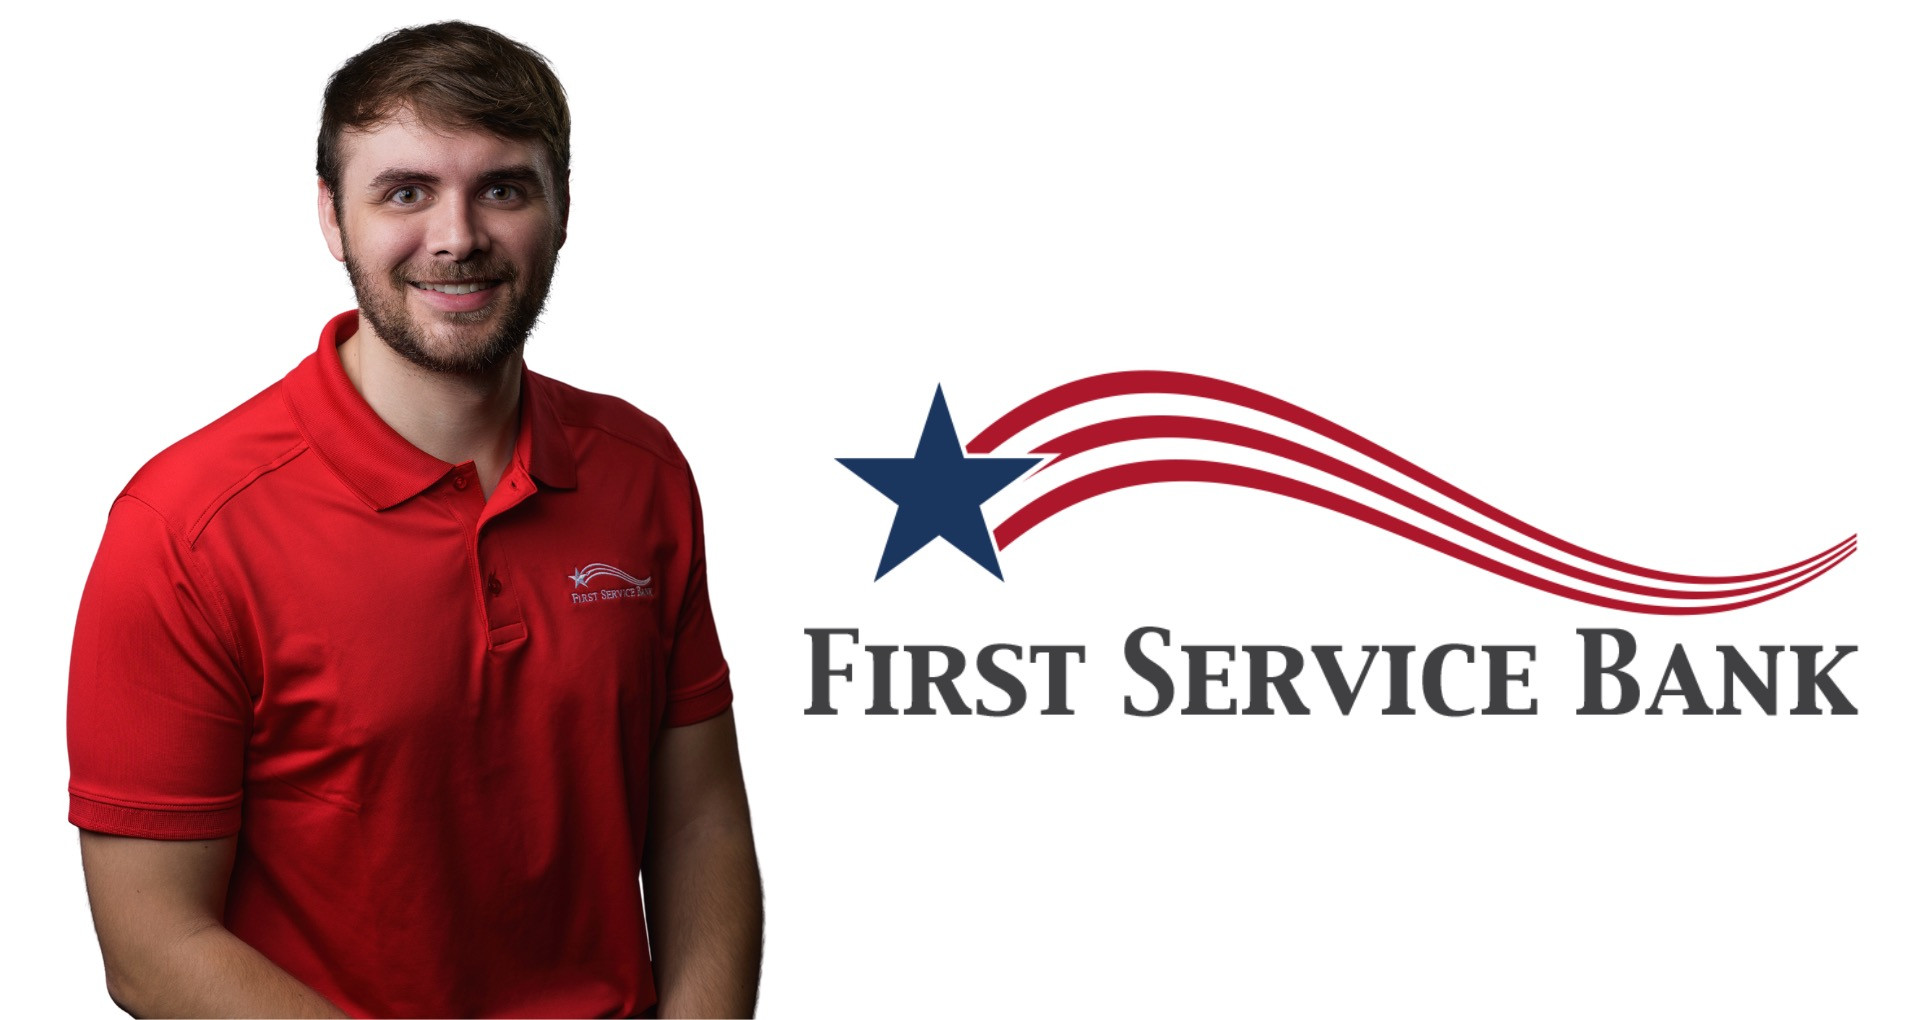 Parker Glass has joined First Service Bank as a credit analyst.